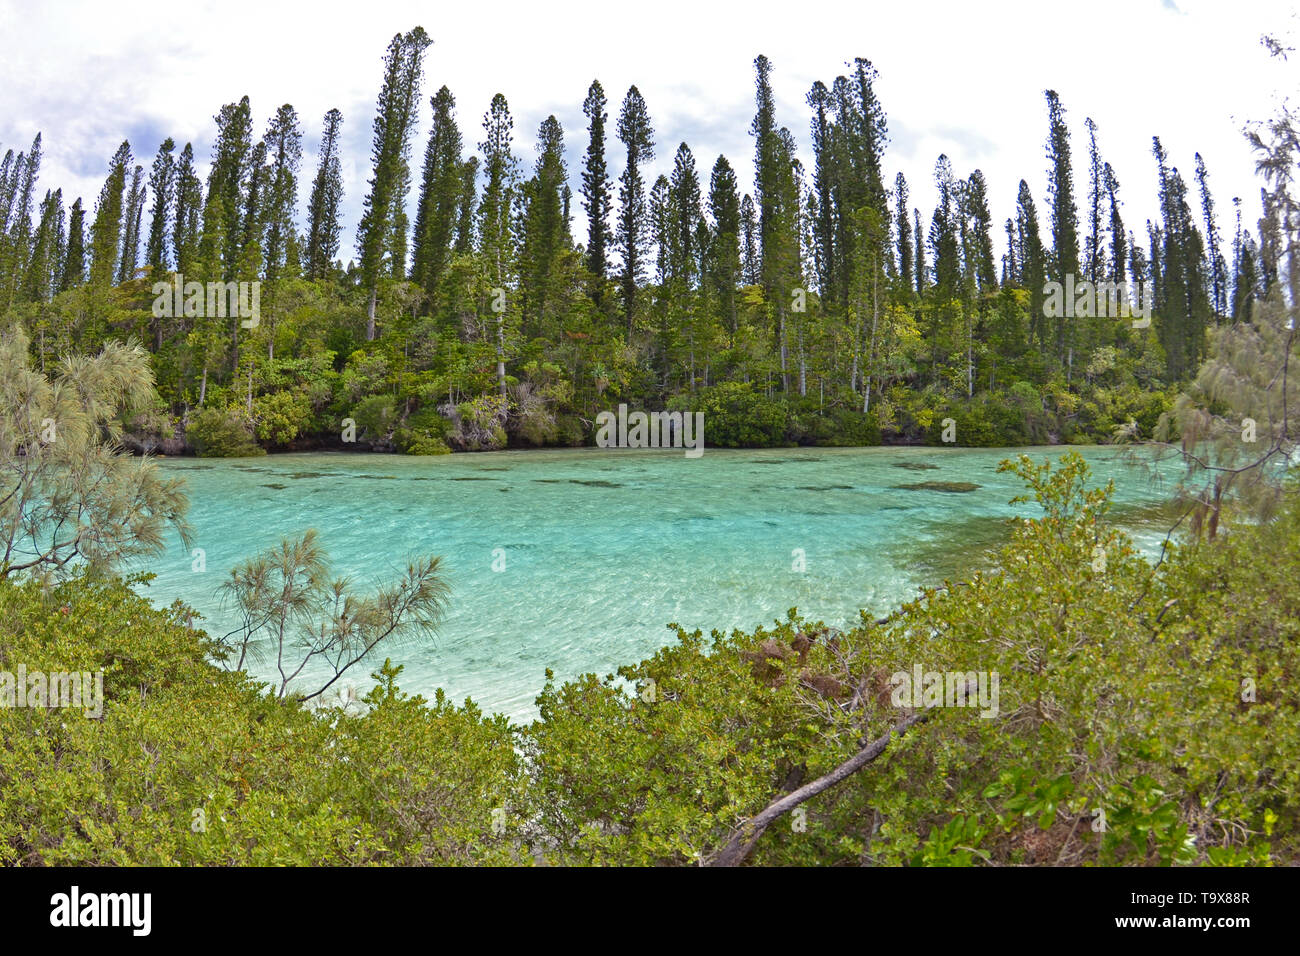 Endemic cook pines, Araucaria columnaris, Natural Pool of Oro Bay, Isle of Pines, New Caledonia, South Pacific Stock Photo